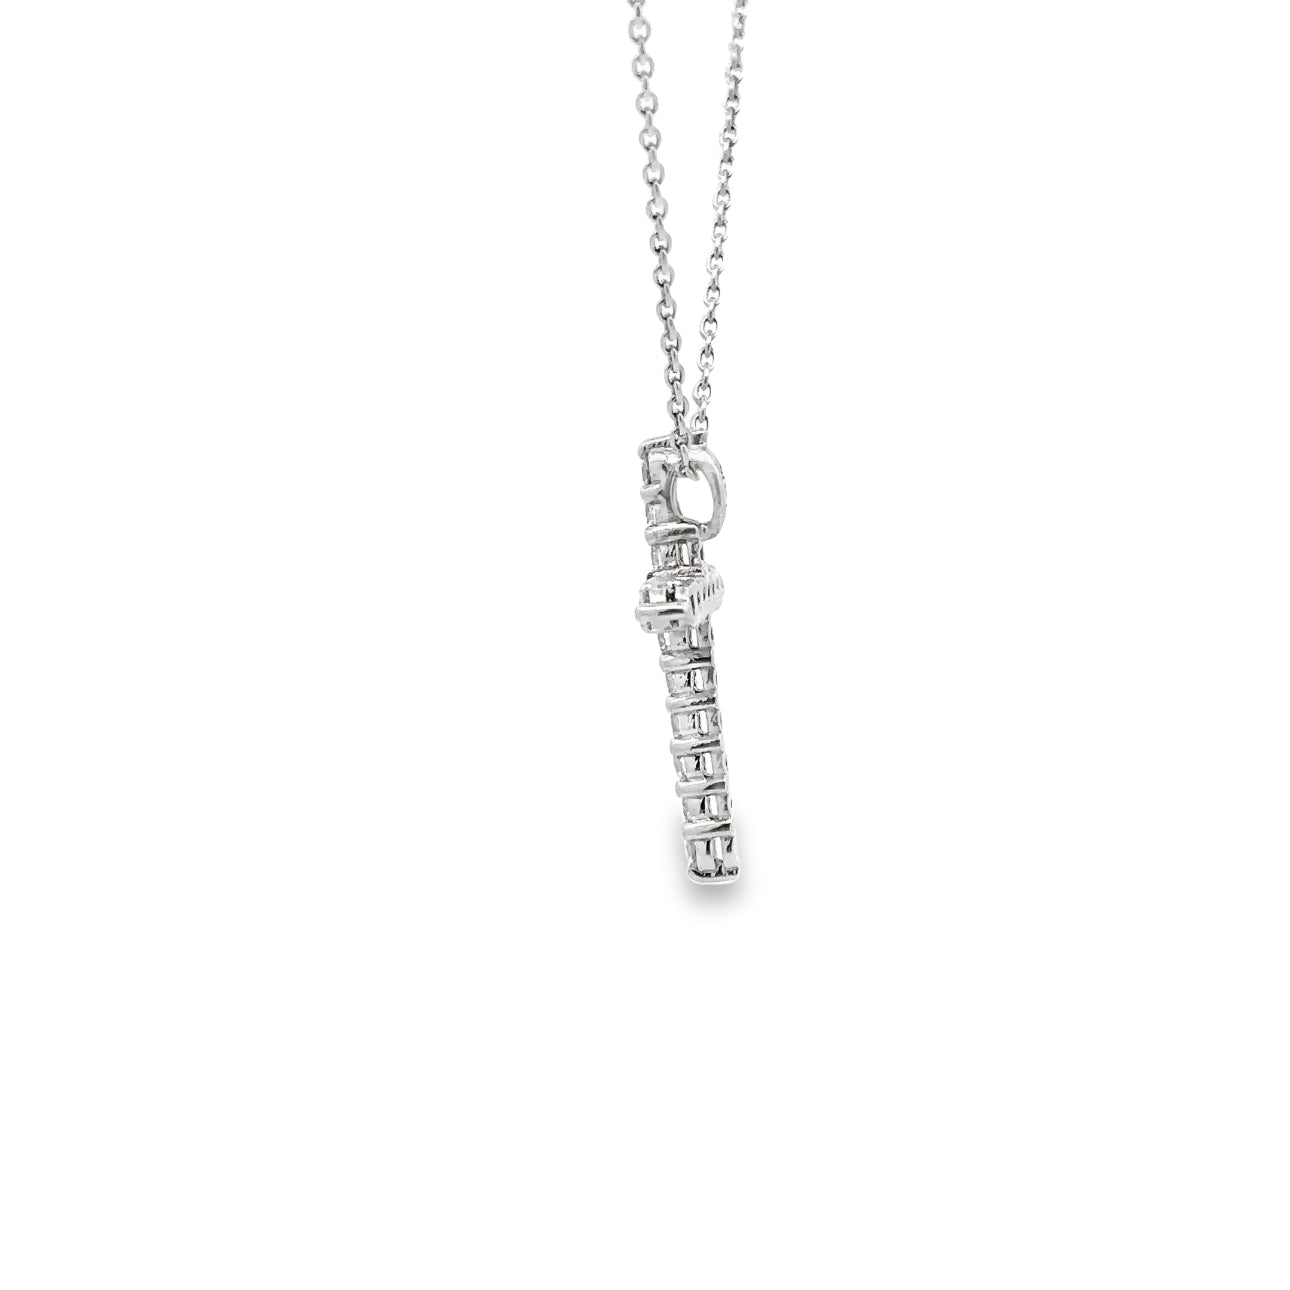 WD1319 White Gold and Diamond Necklace